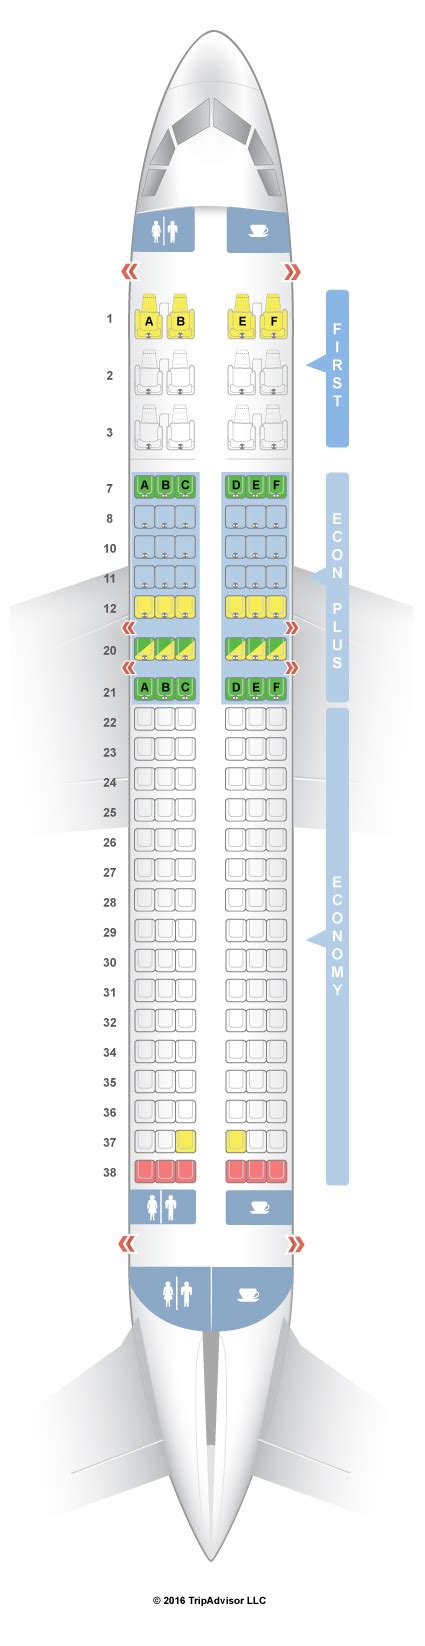 United Airlines Airbus A320 Seat Map